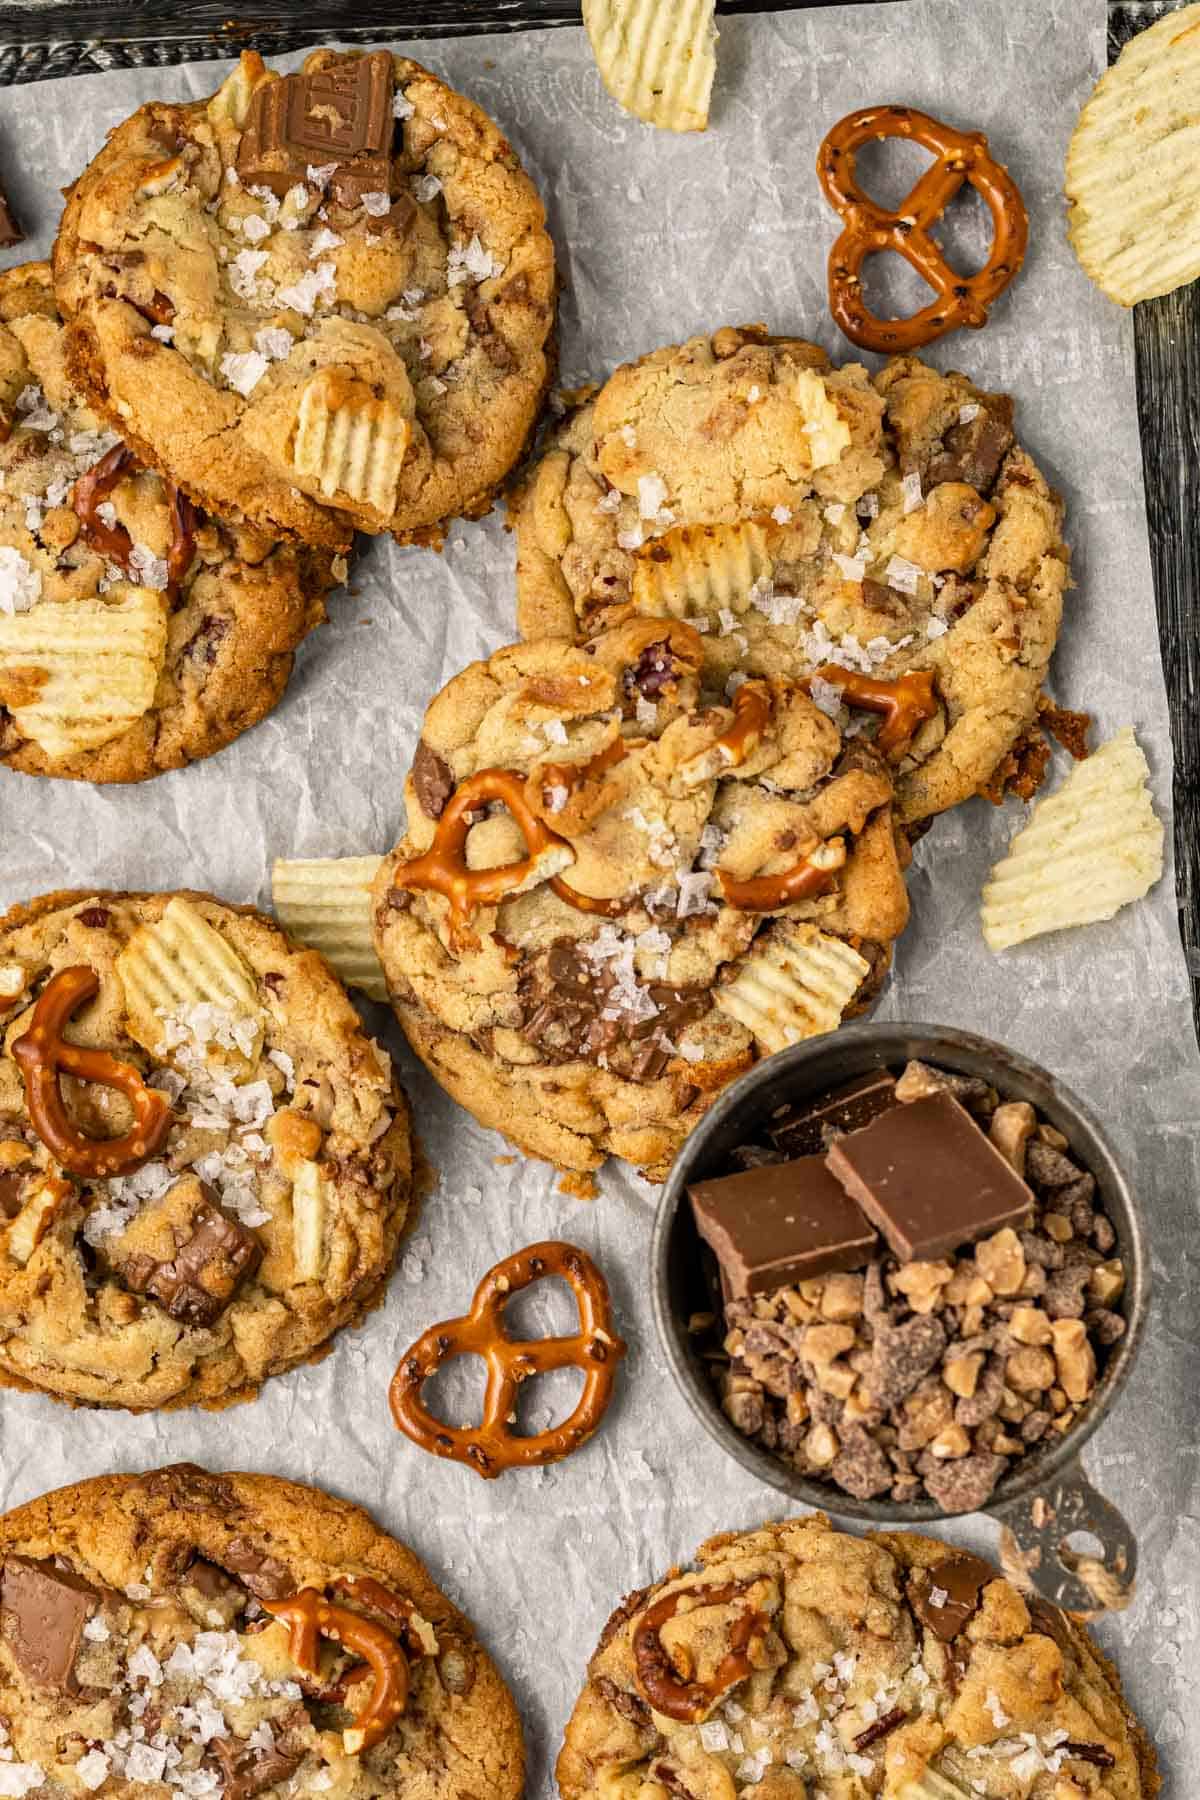 a sheet pan lined with parchment paper with kitchen sink cookies arranged on top surrounded by potato chips, pretzels, chunks of chocolate, and a small black dish of toffee bits